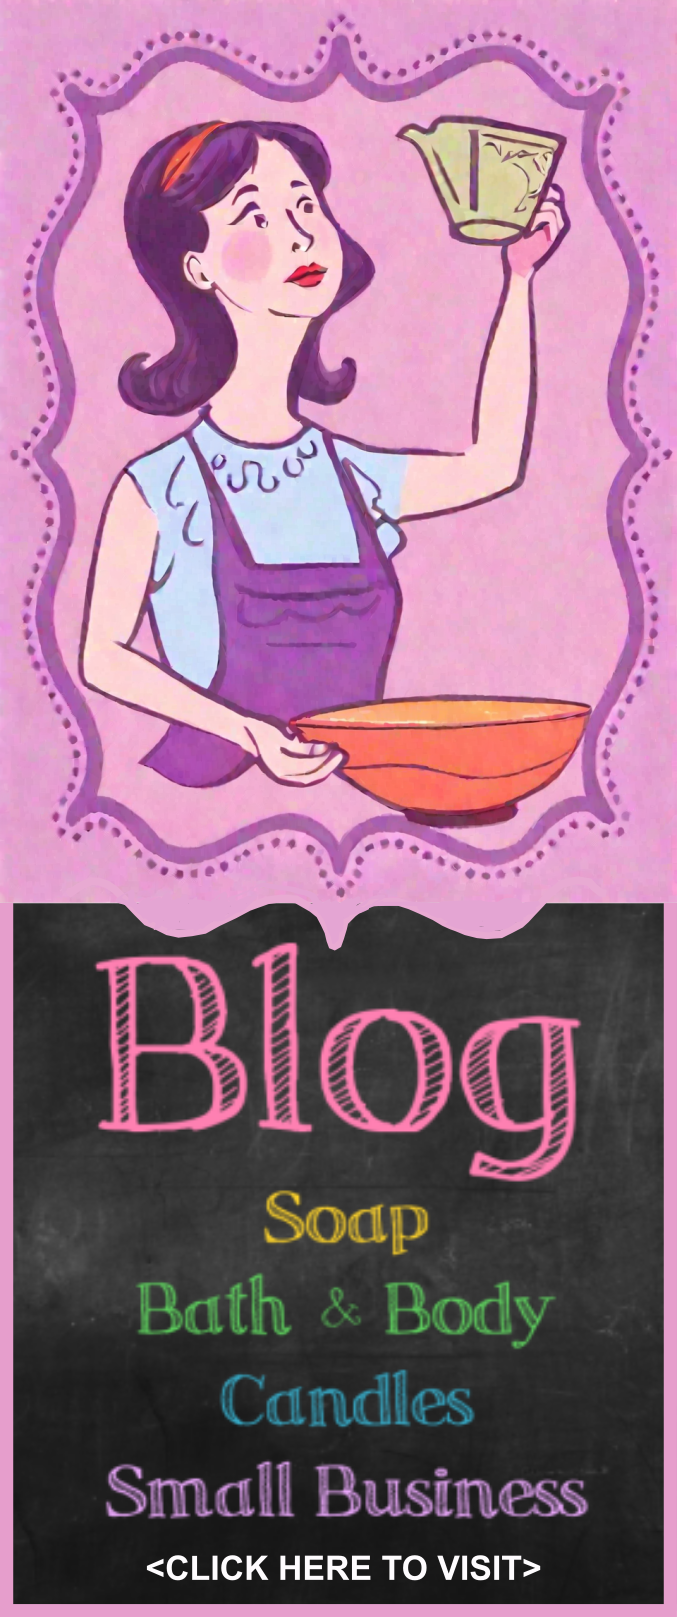 Cartoon rendering of blog author making soap.